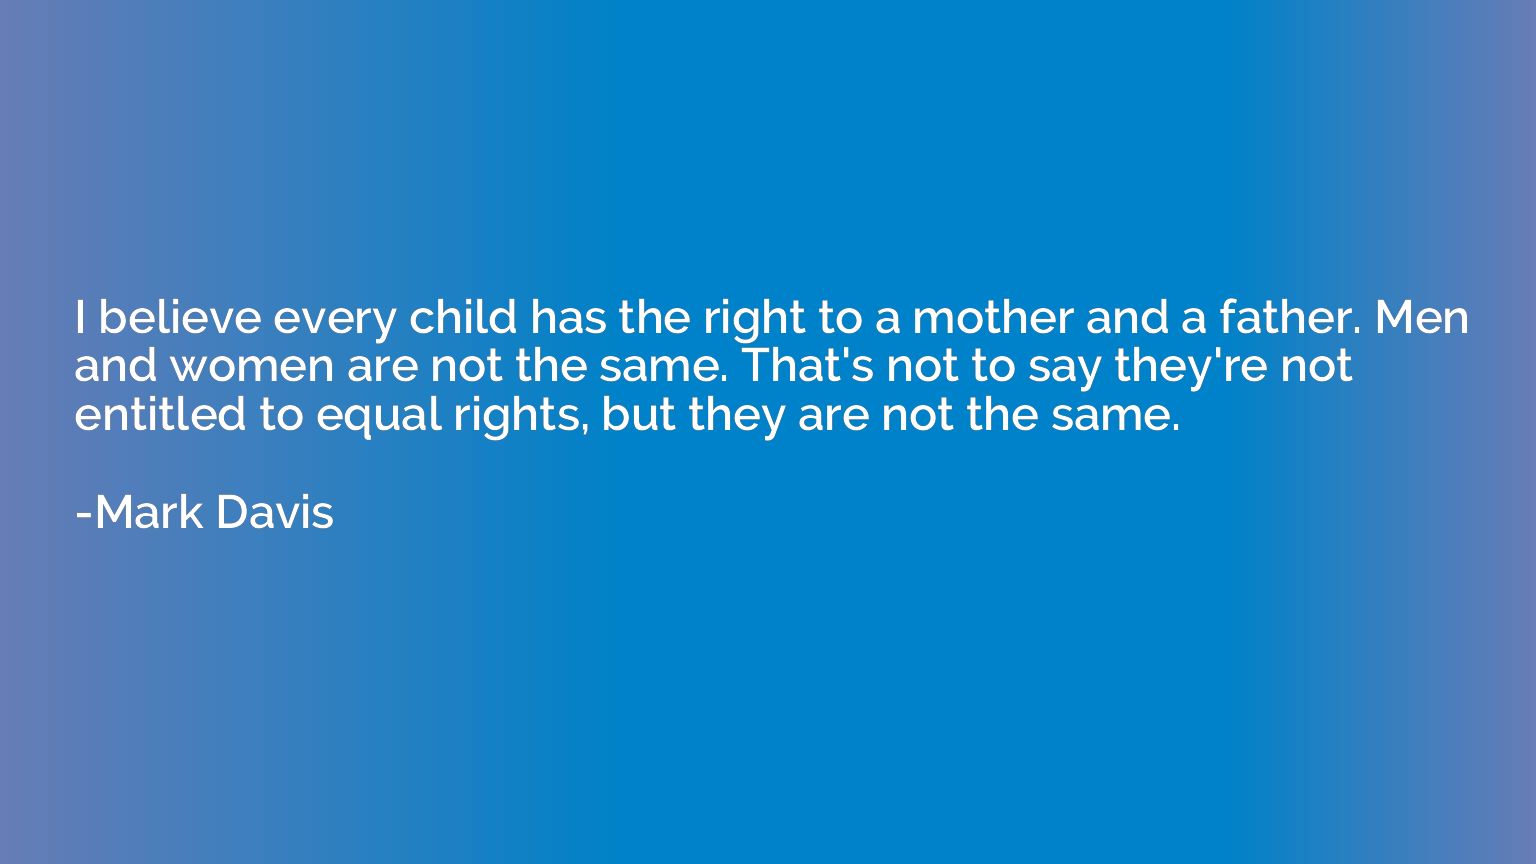 I believe every child has the right to a mother and a father